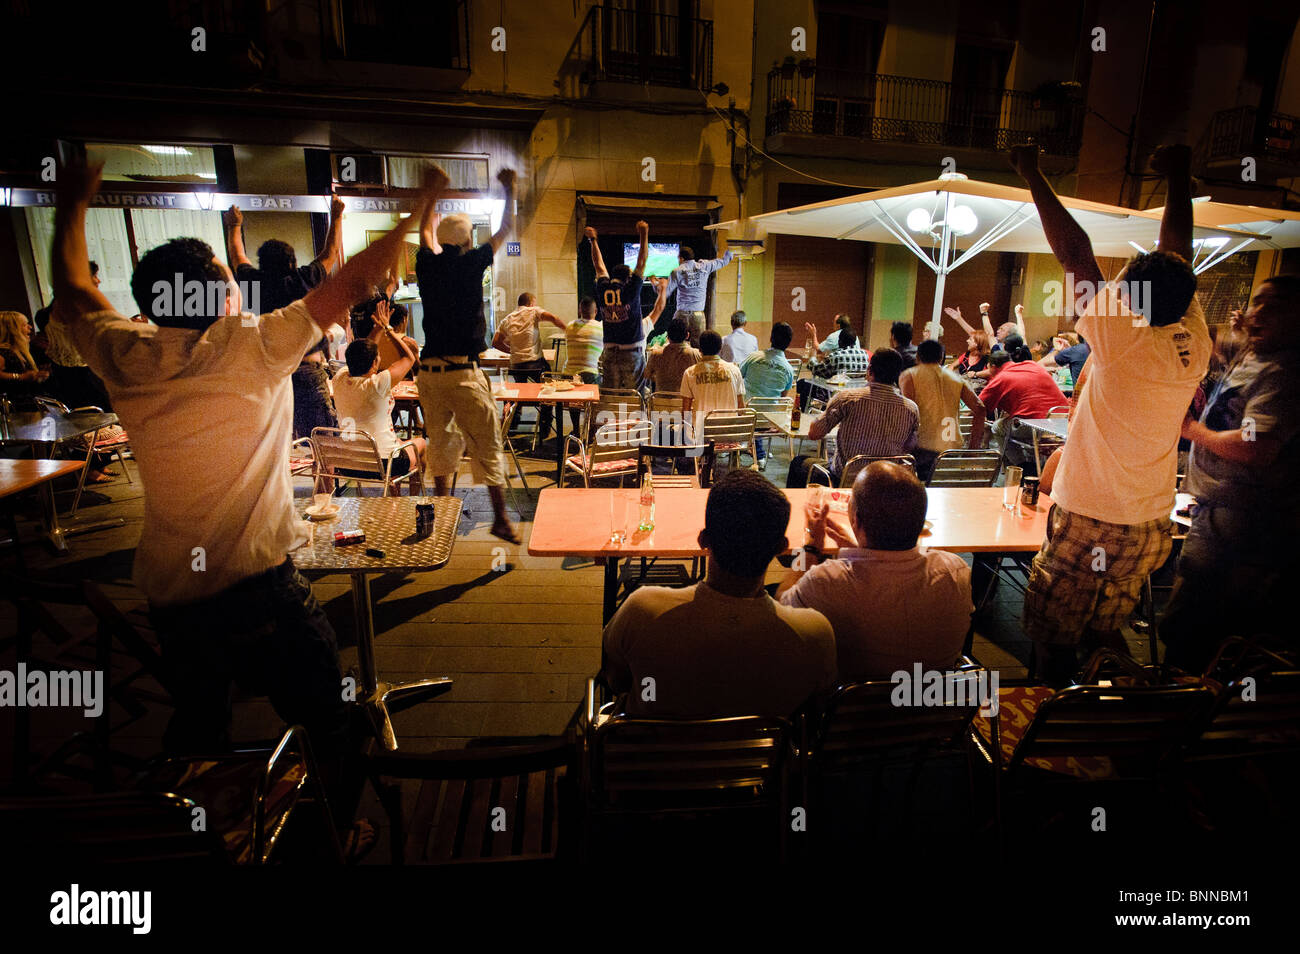 Spain scores the winning goal in the World Cup Final - July 2010 - as seen in a square in Manresa, Spain Stock Photo